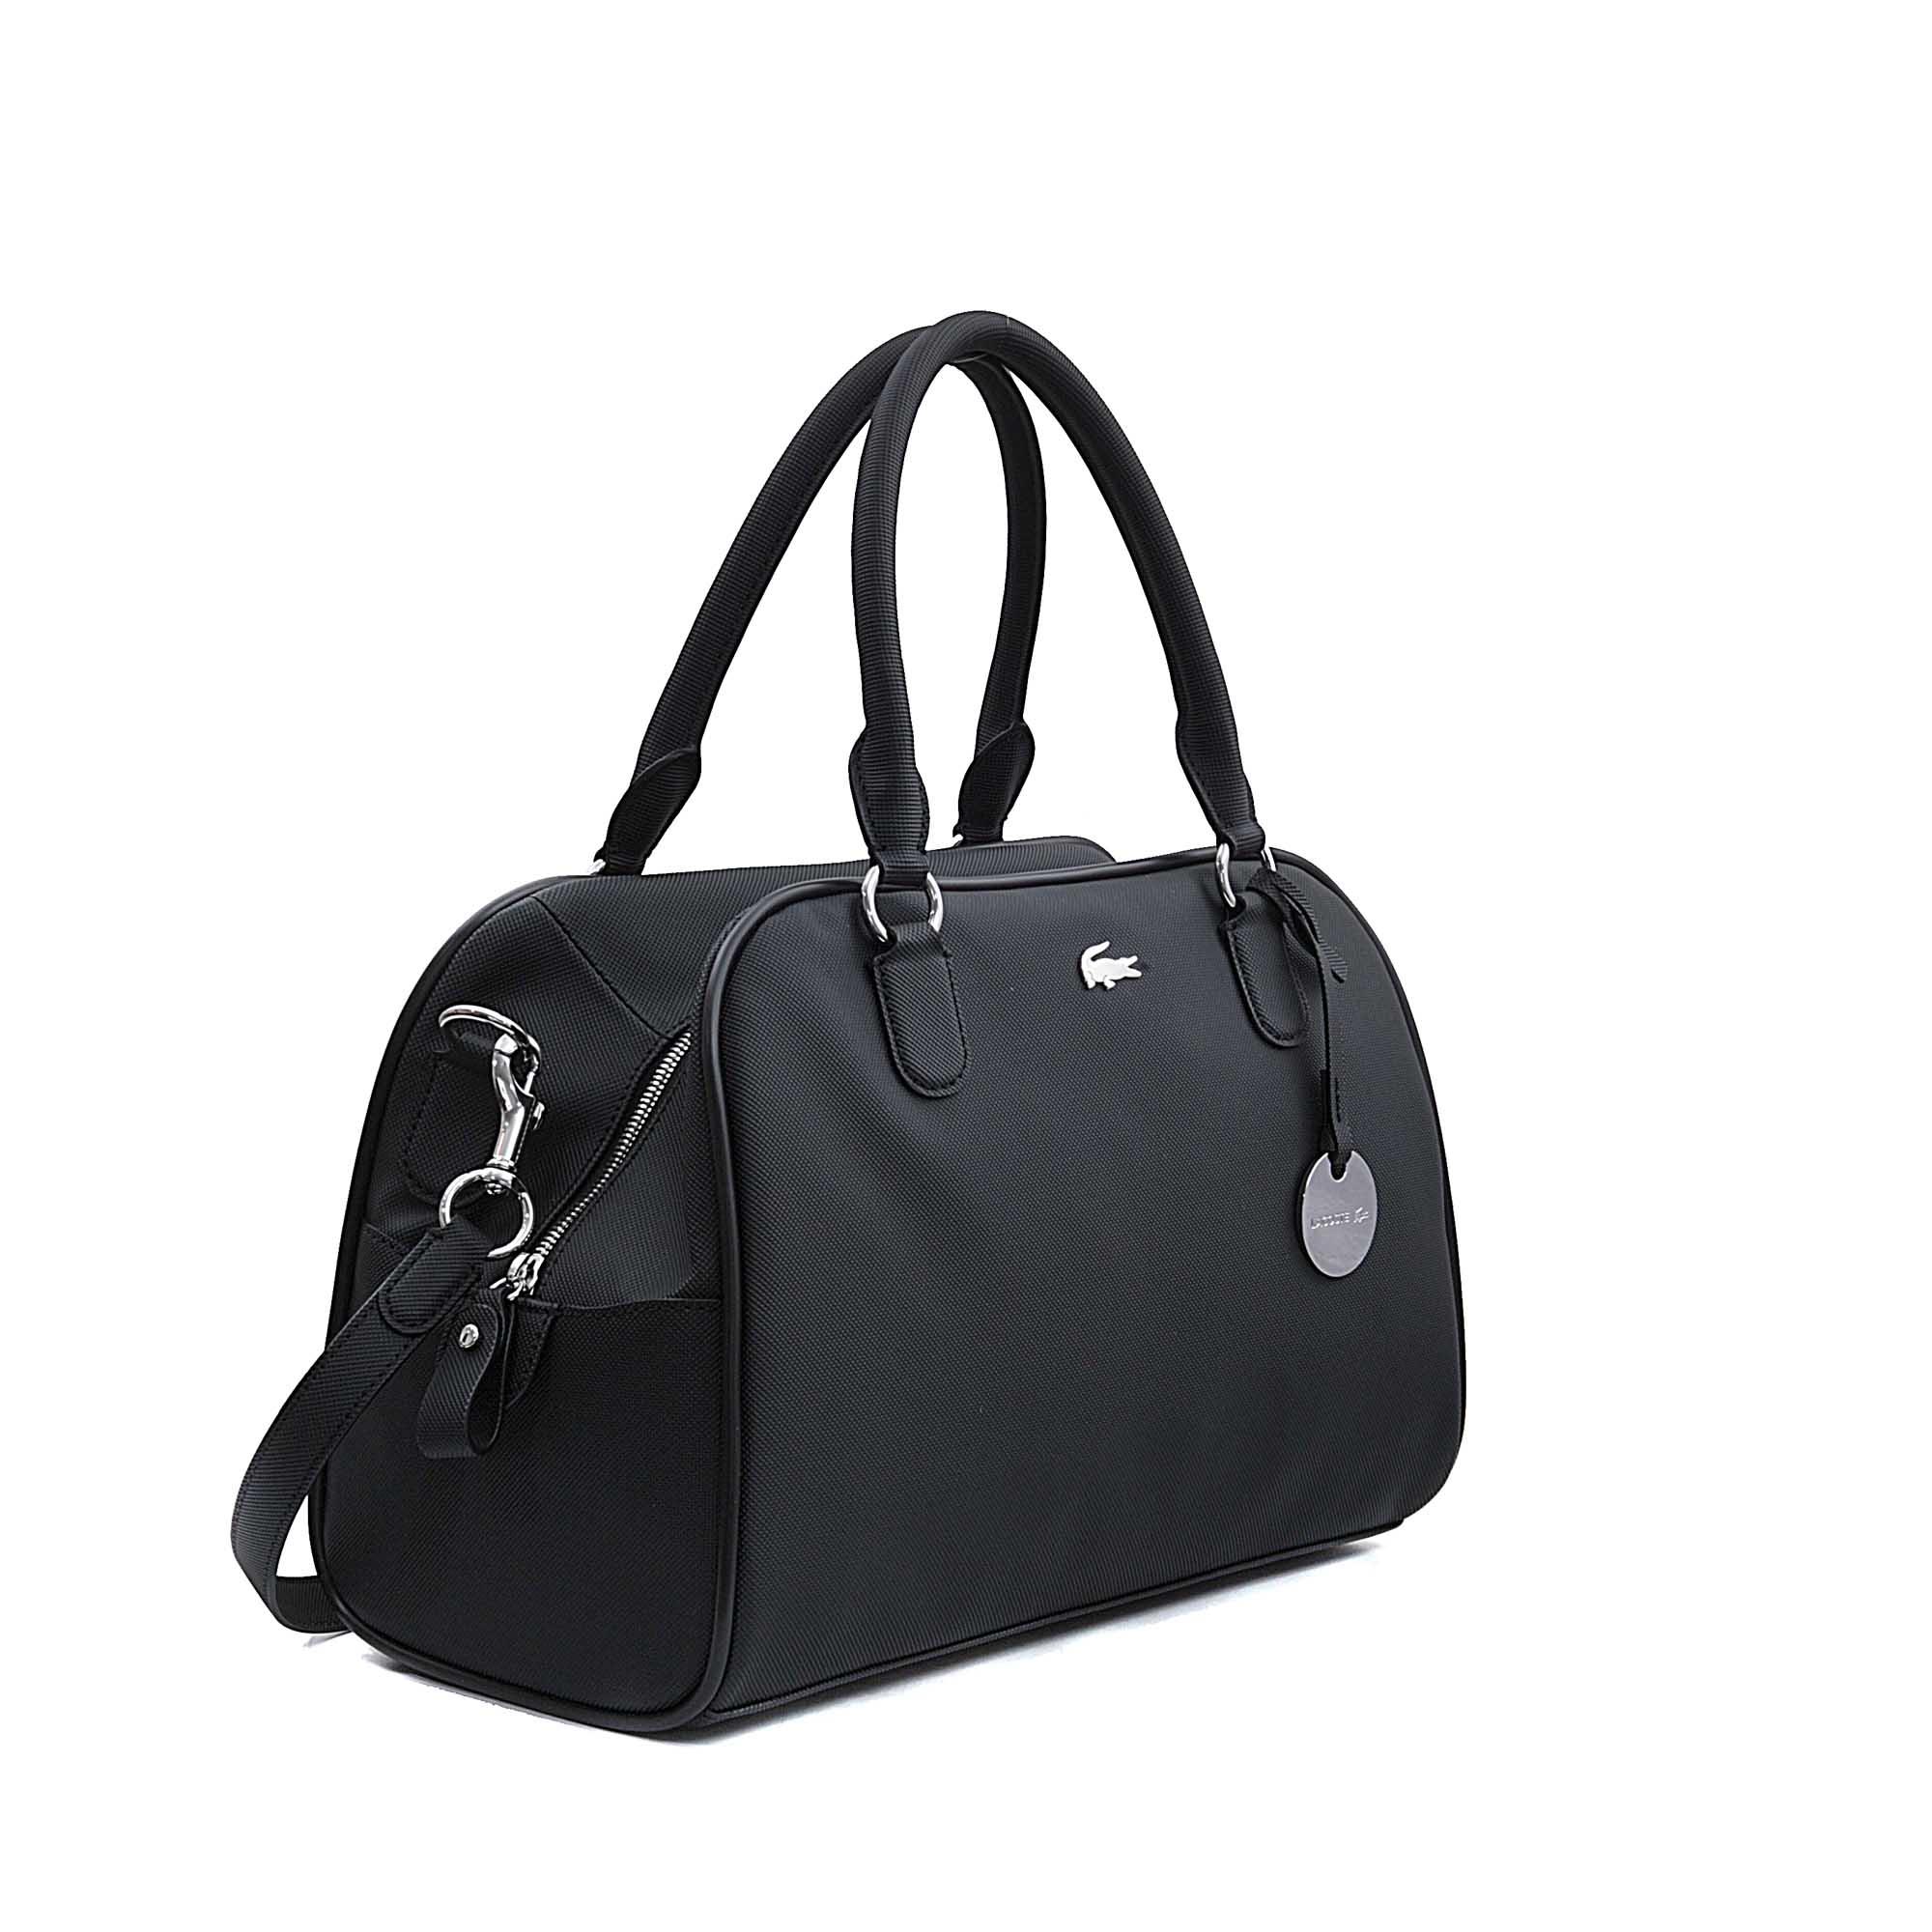 Lacoste Cotton Daily Classic Bowling Bag in Black - Lyst